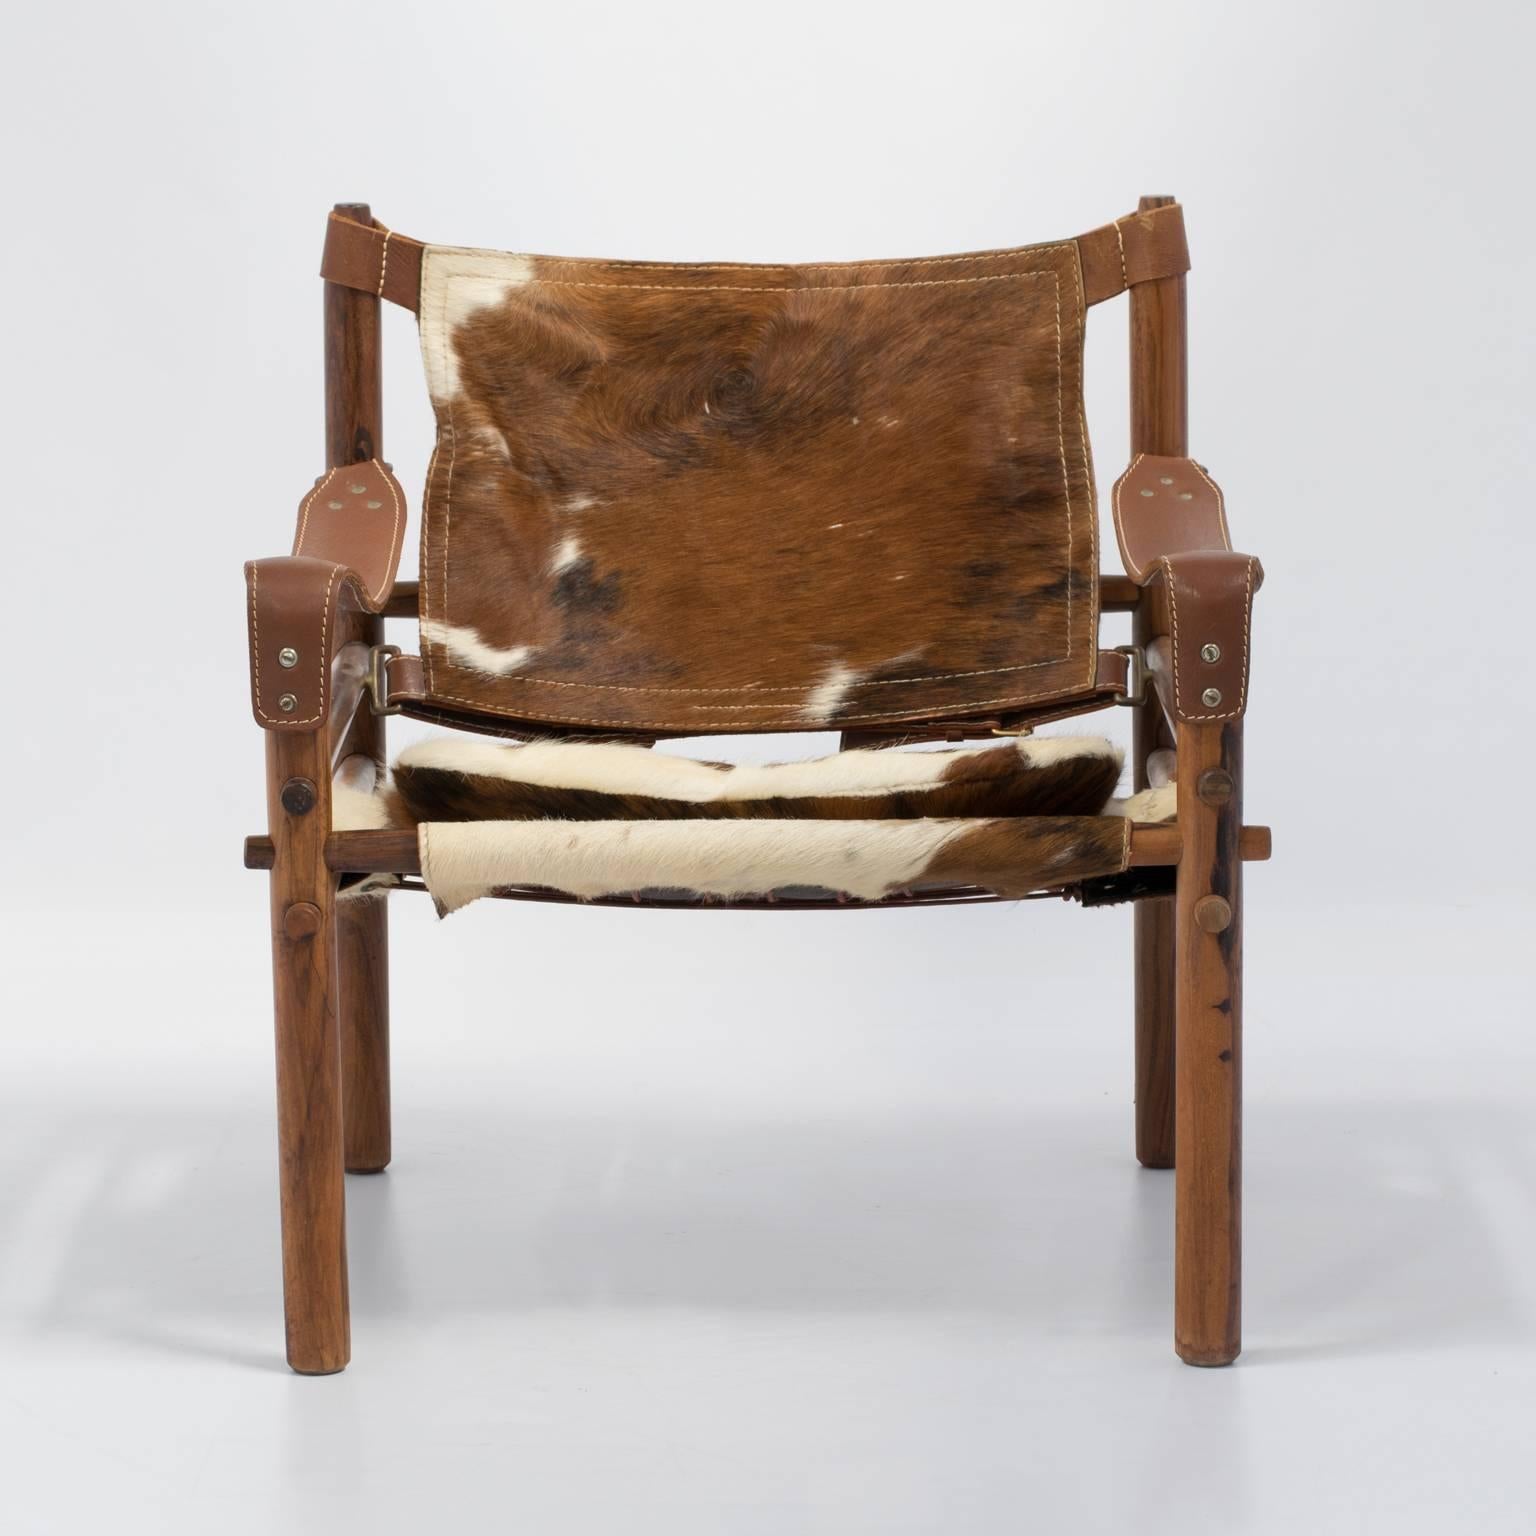 Fabulous Sirocco safari chair by the Swedish designer Arne Norell in rosewood and a lush hair-on-cowhide. This chair has a beautiful rustic modern vibe; the brindle cowhide is so perfect with the rosewood, bronze hardware and white over-stiching on